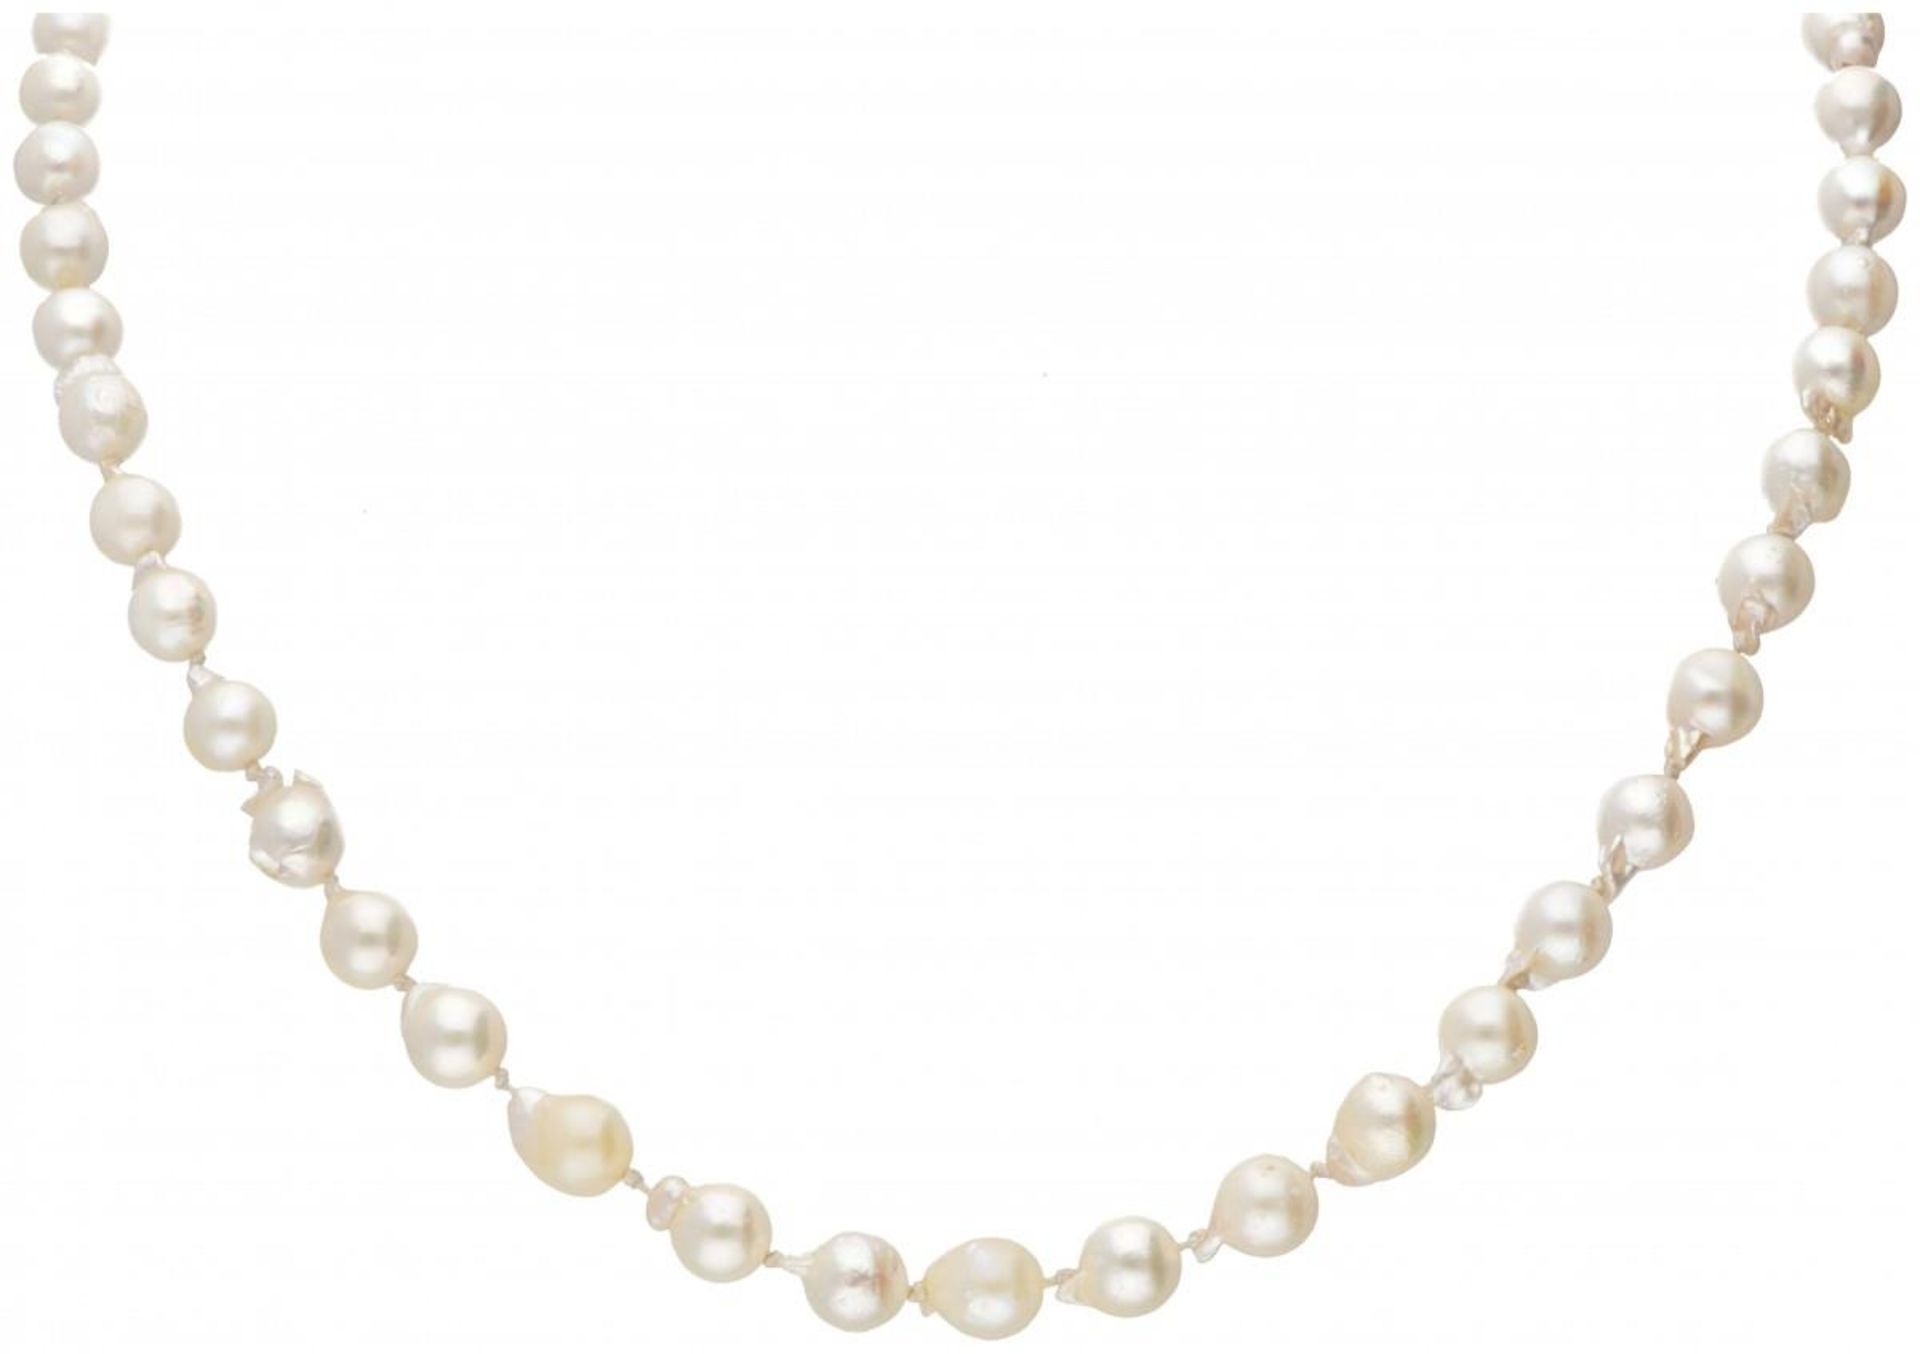 Freshwater pearl necklace with a 14K. yellow gold closure. - Image 2 of 2